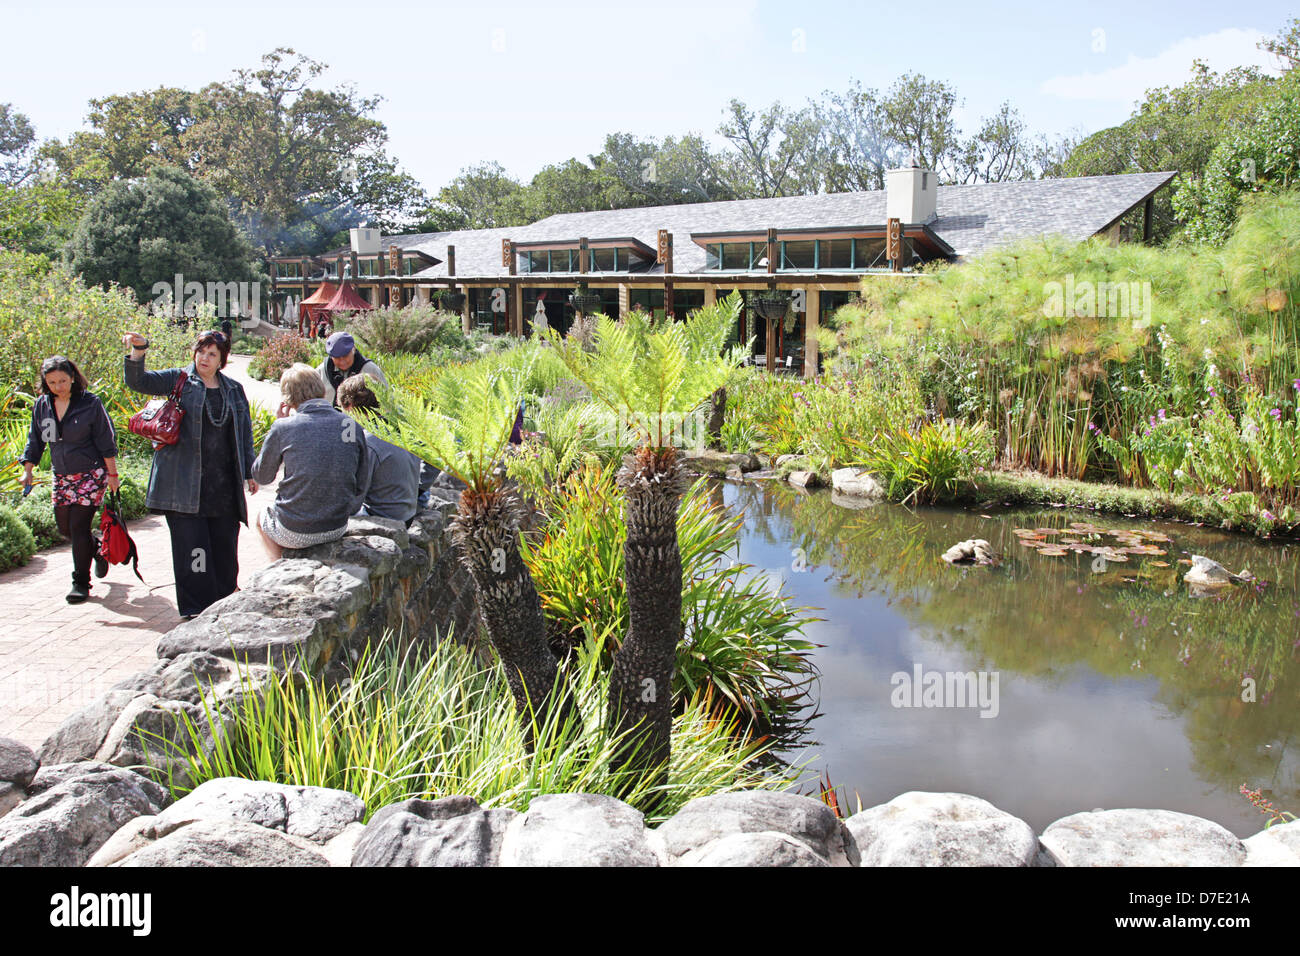 People outside Moyo Restaurant at the beautiful Kirstenbosch Gardens in Cape Town, South Africa Stock Photo